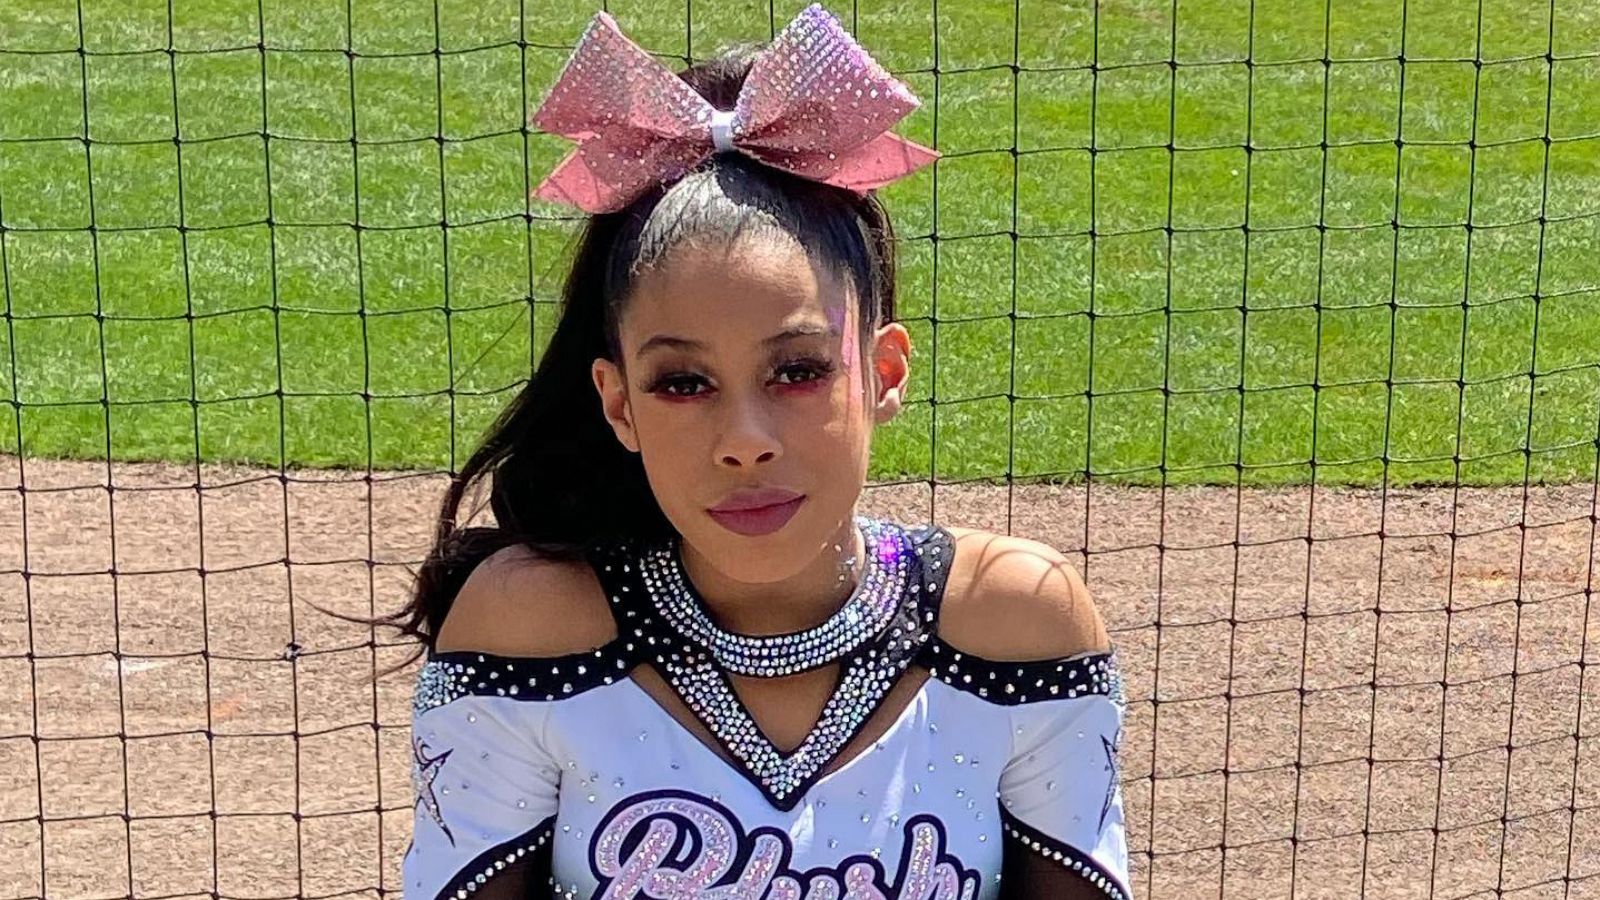 Maryland all-star cheerleader kicked off team after incident involving hair  policy, mom says